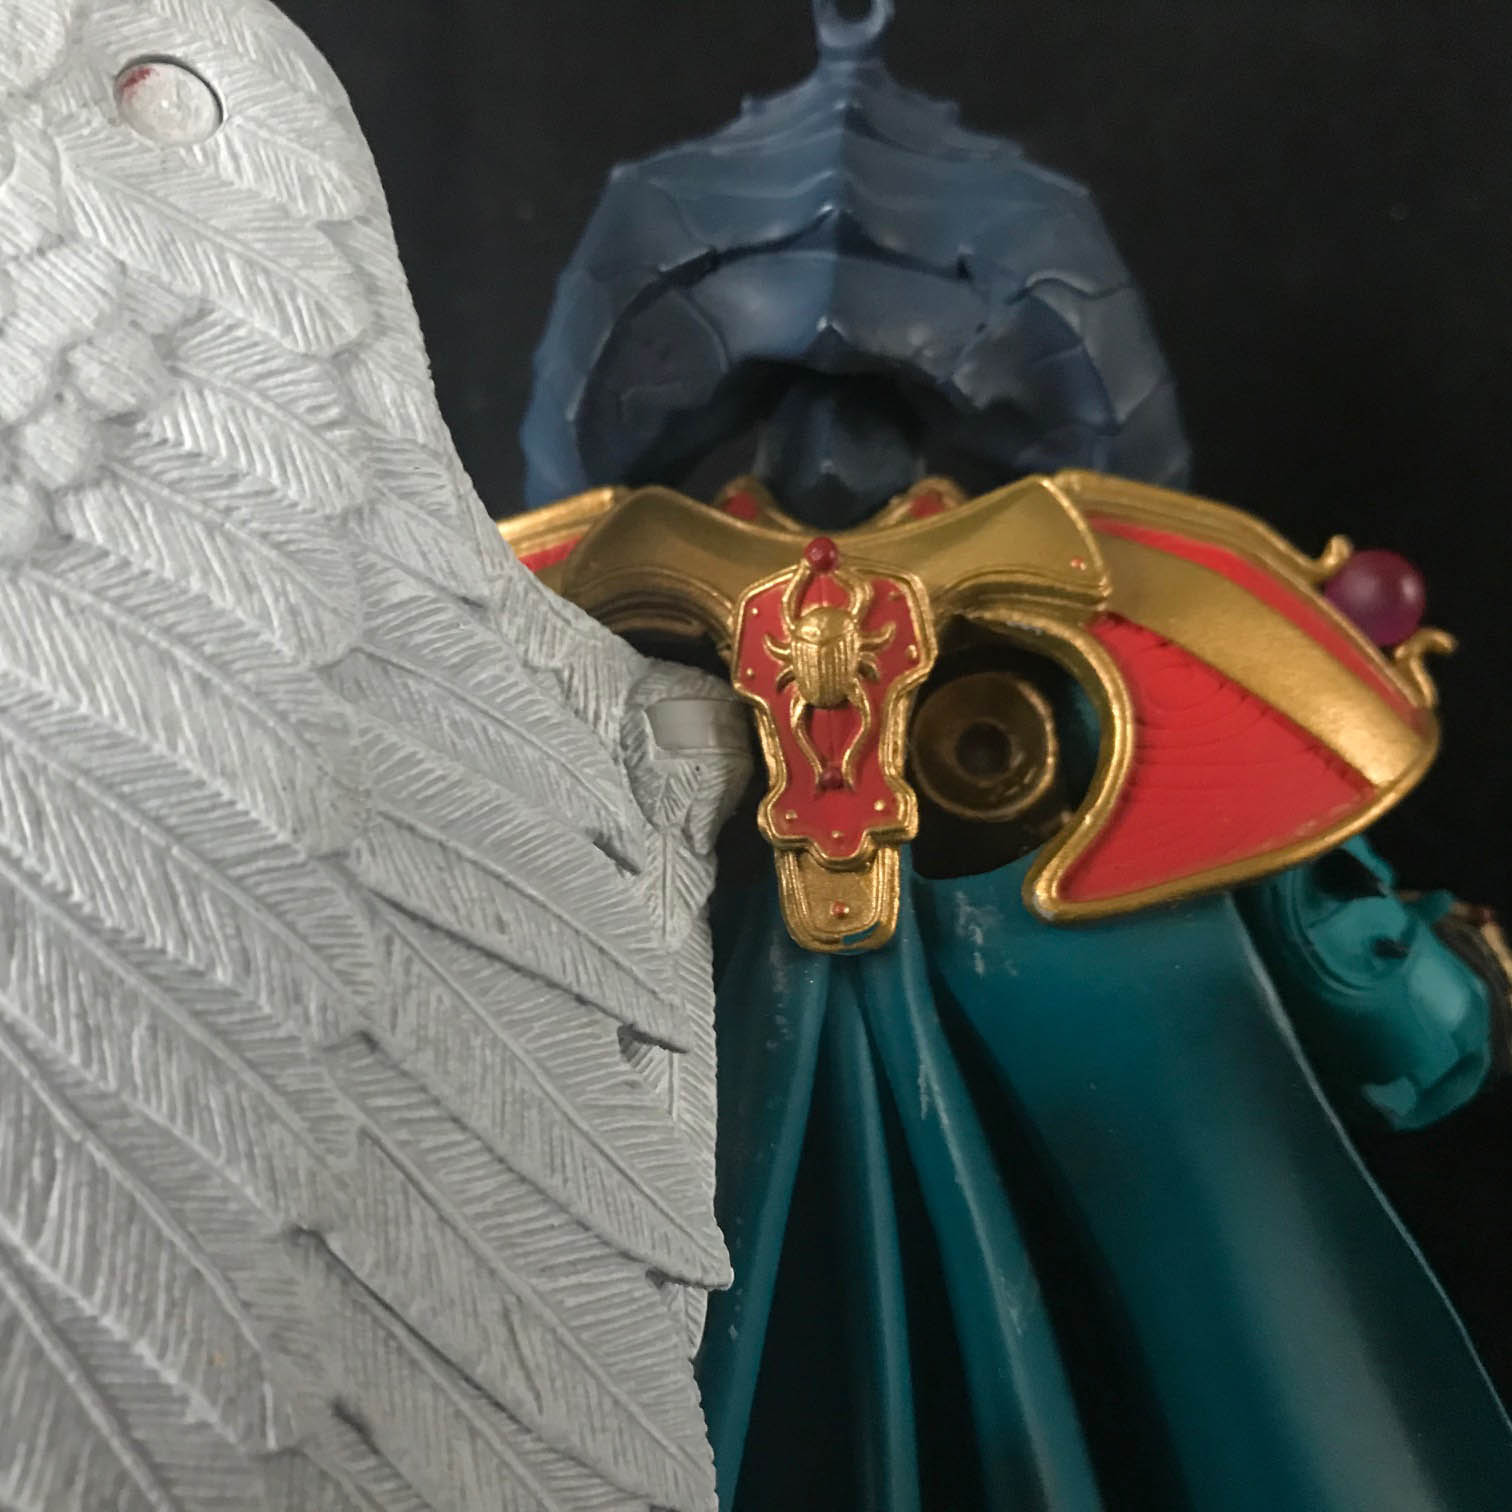 Mythic Legions wing adapters